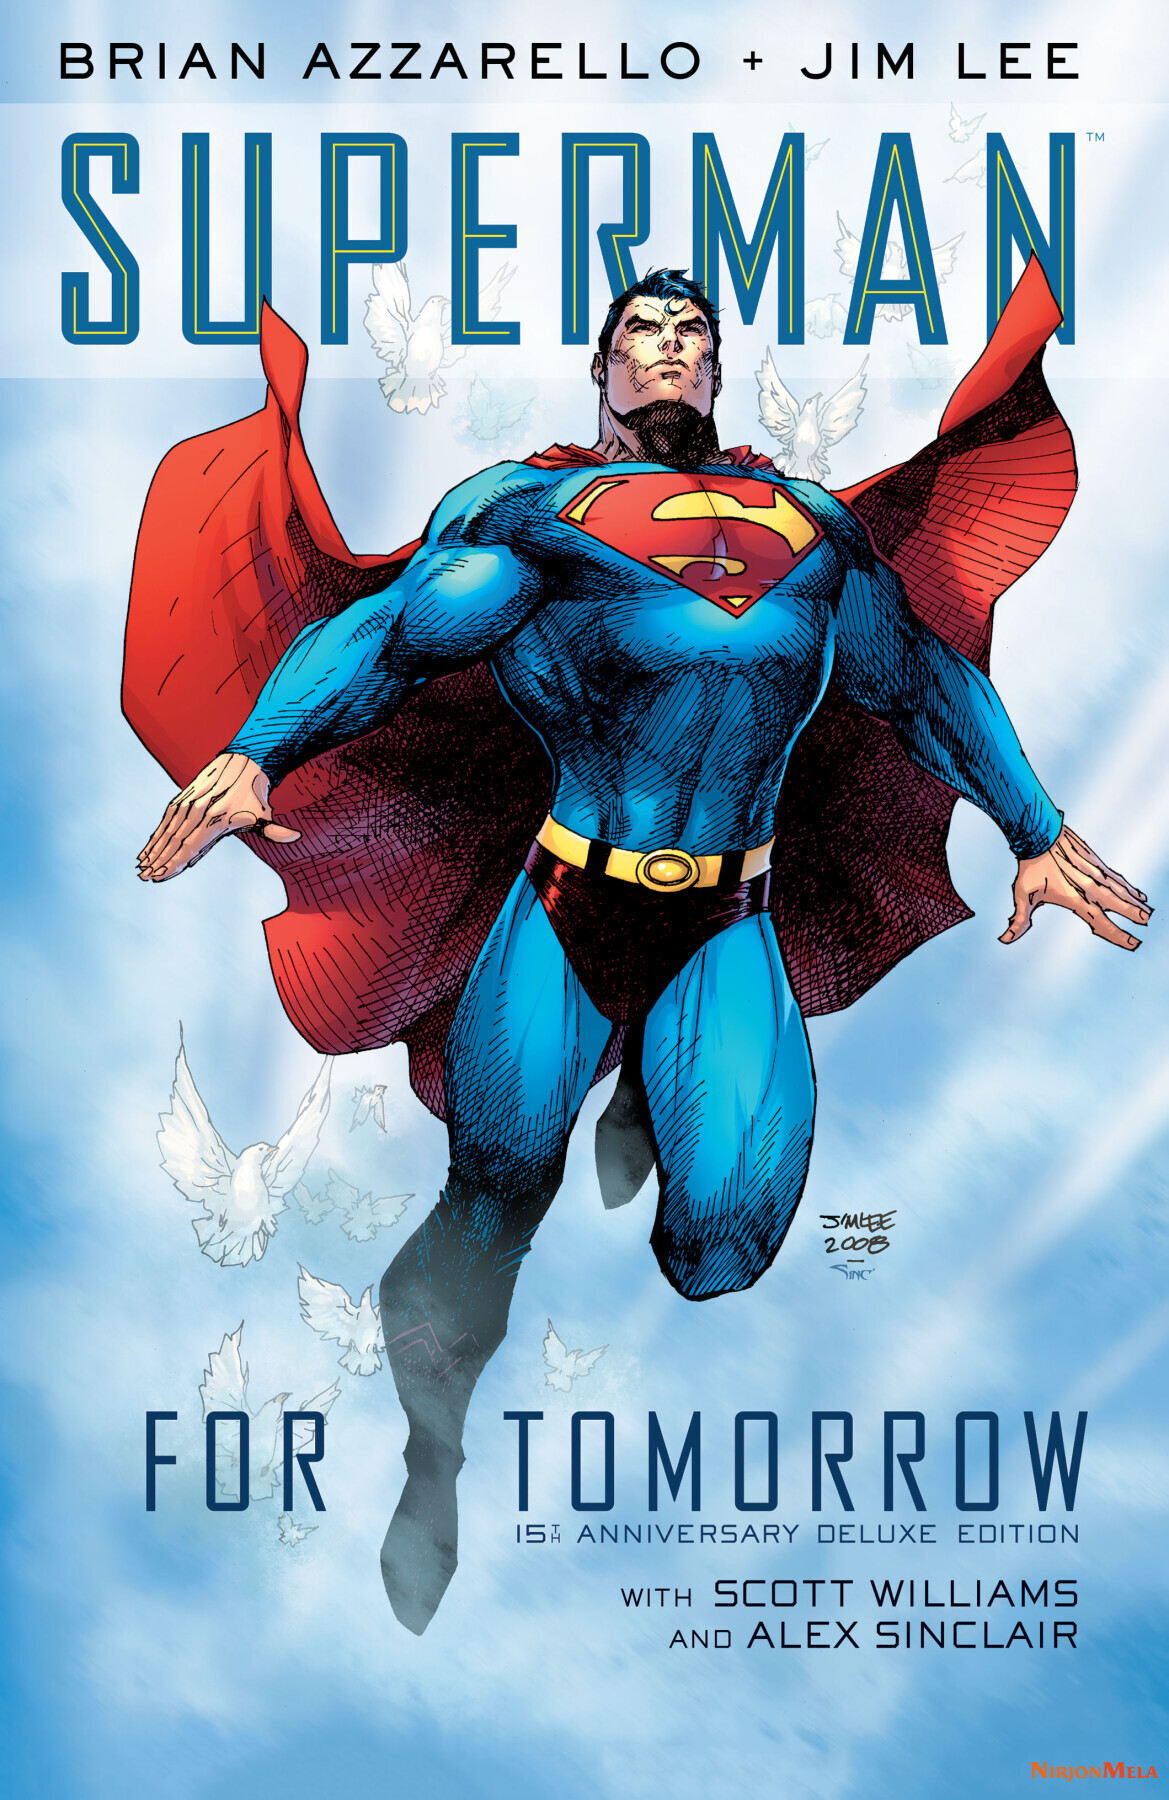 Superman---For-Tomorrow-15th-Anniversary-Deluxe-Edition-000.jpg